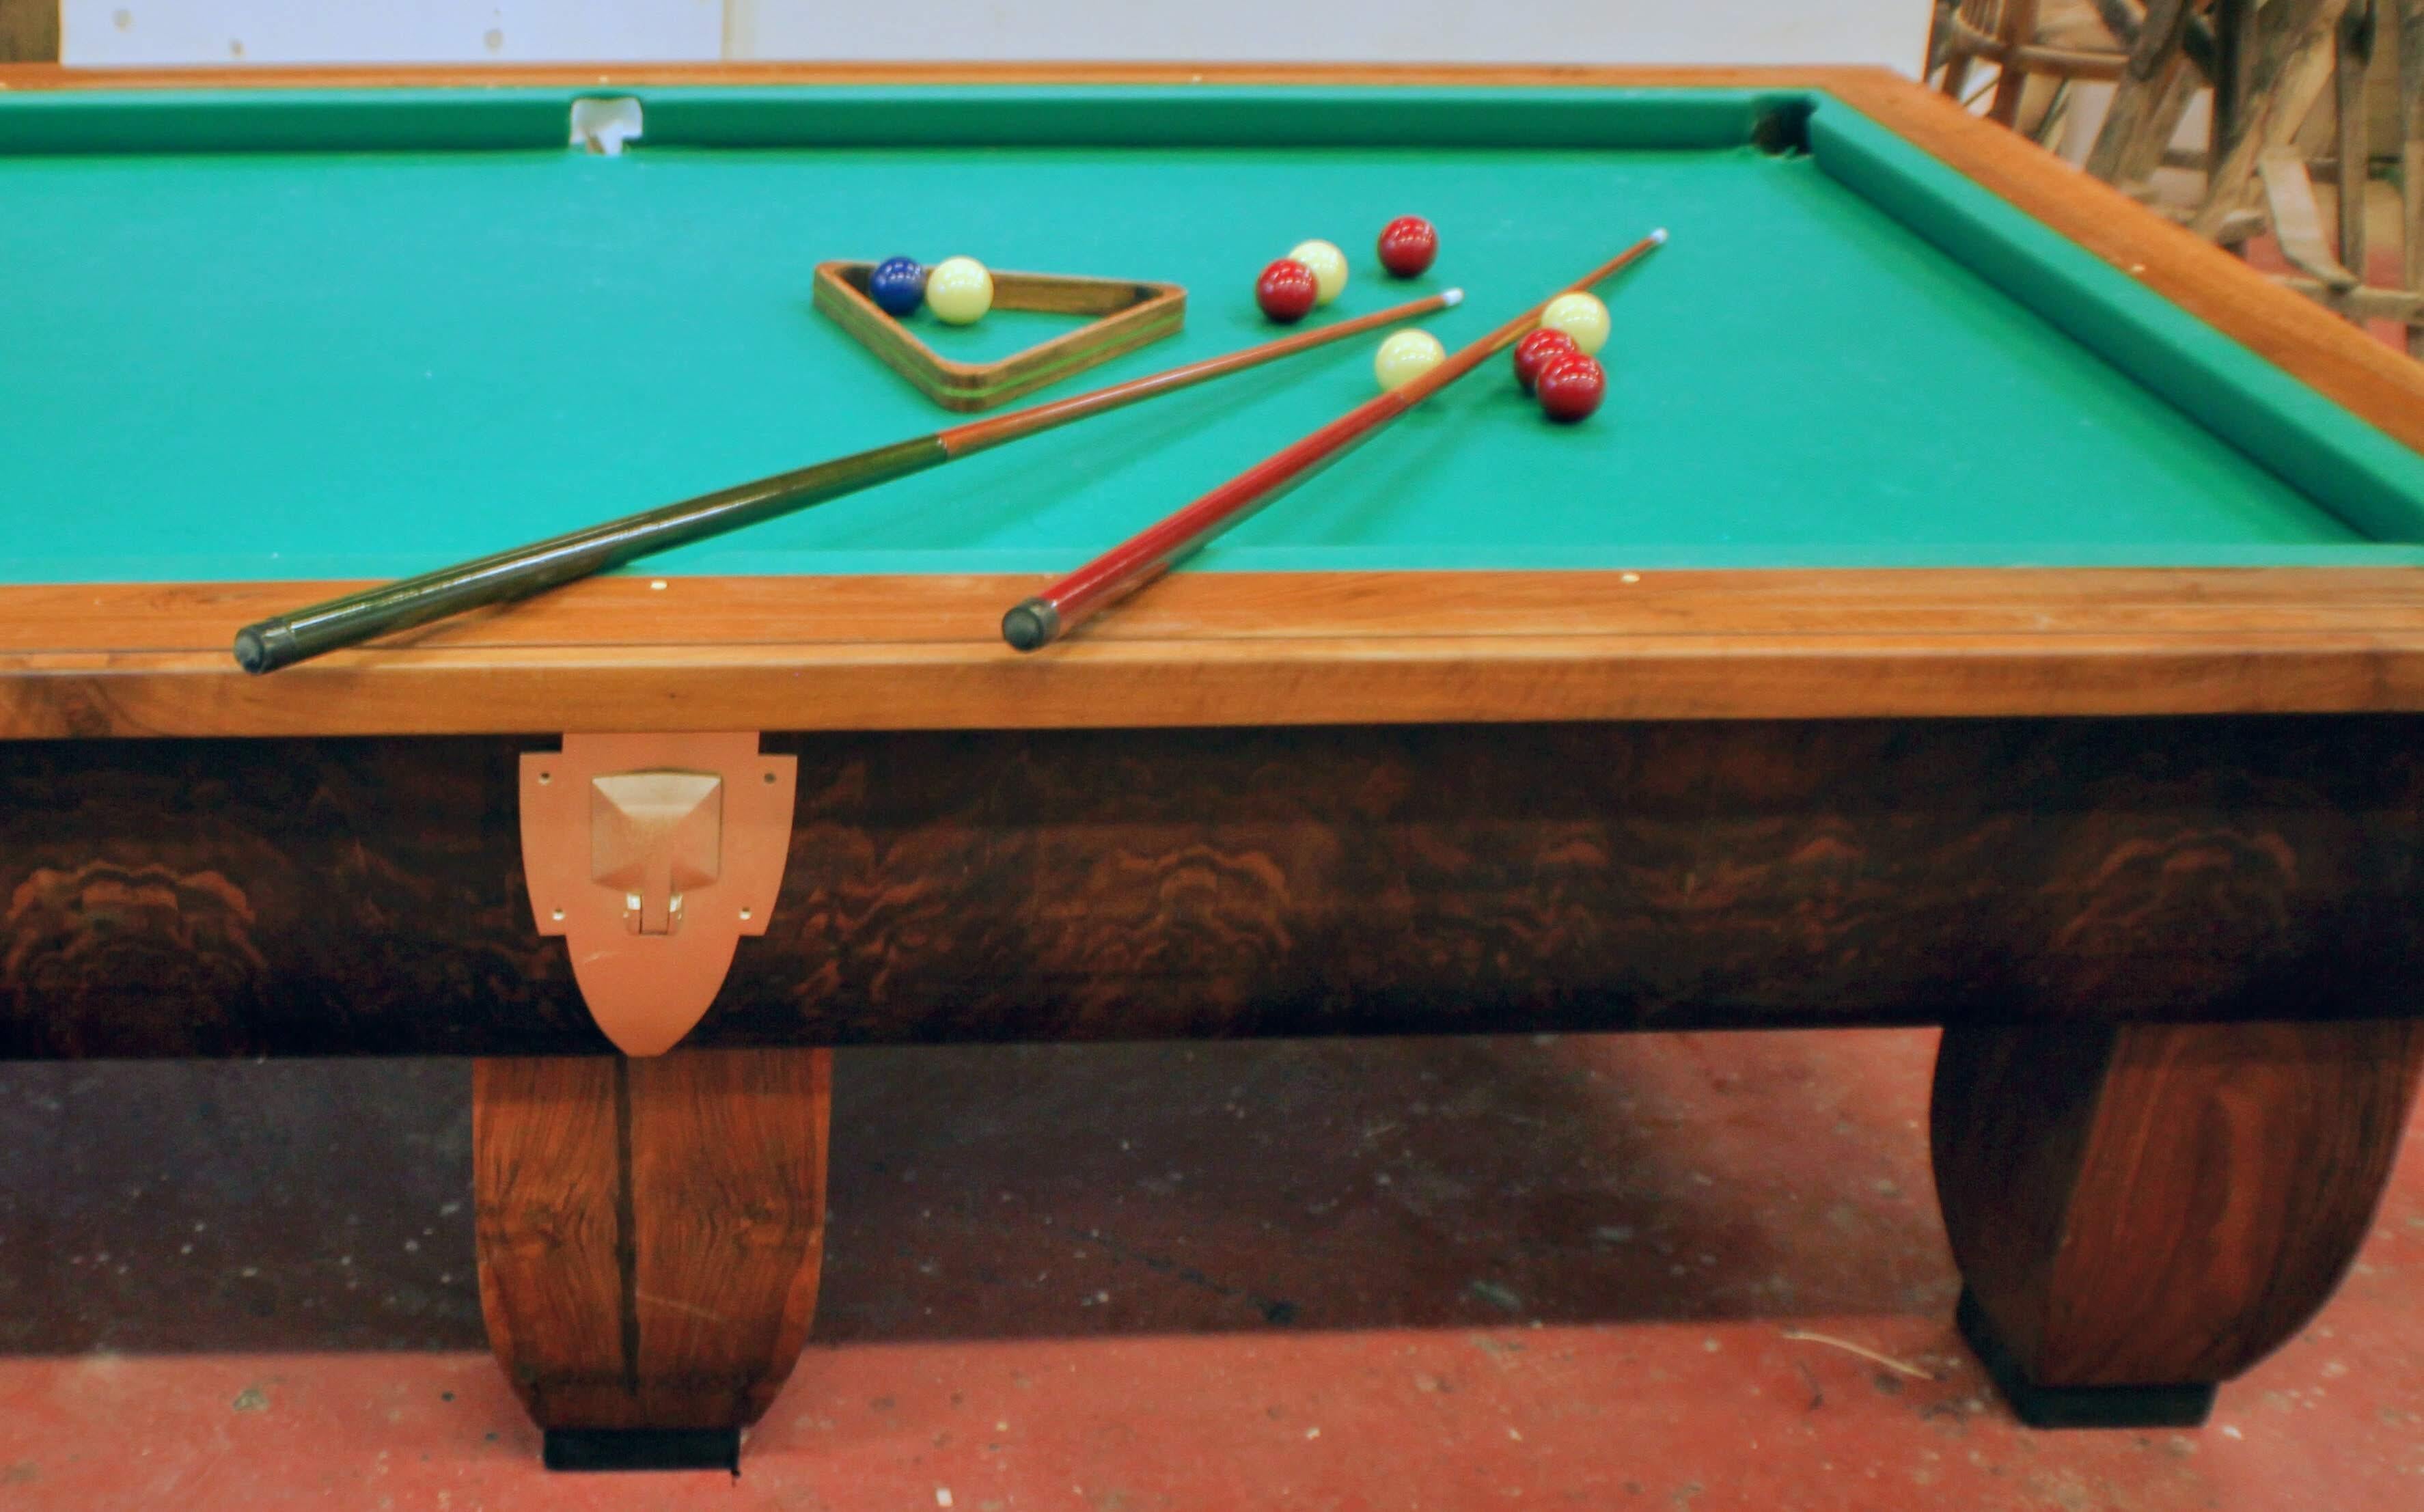 Beautiful Italian 20s pool table, very good condition, bakelite marbles, brass details, original cues and scorecards included.

Please note that all of our items are shipped after a microwave woodworm treatment, grouting woodworm holes and a deep